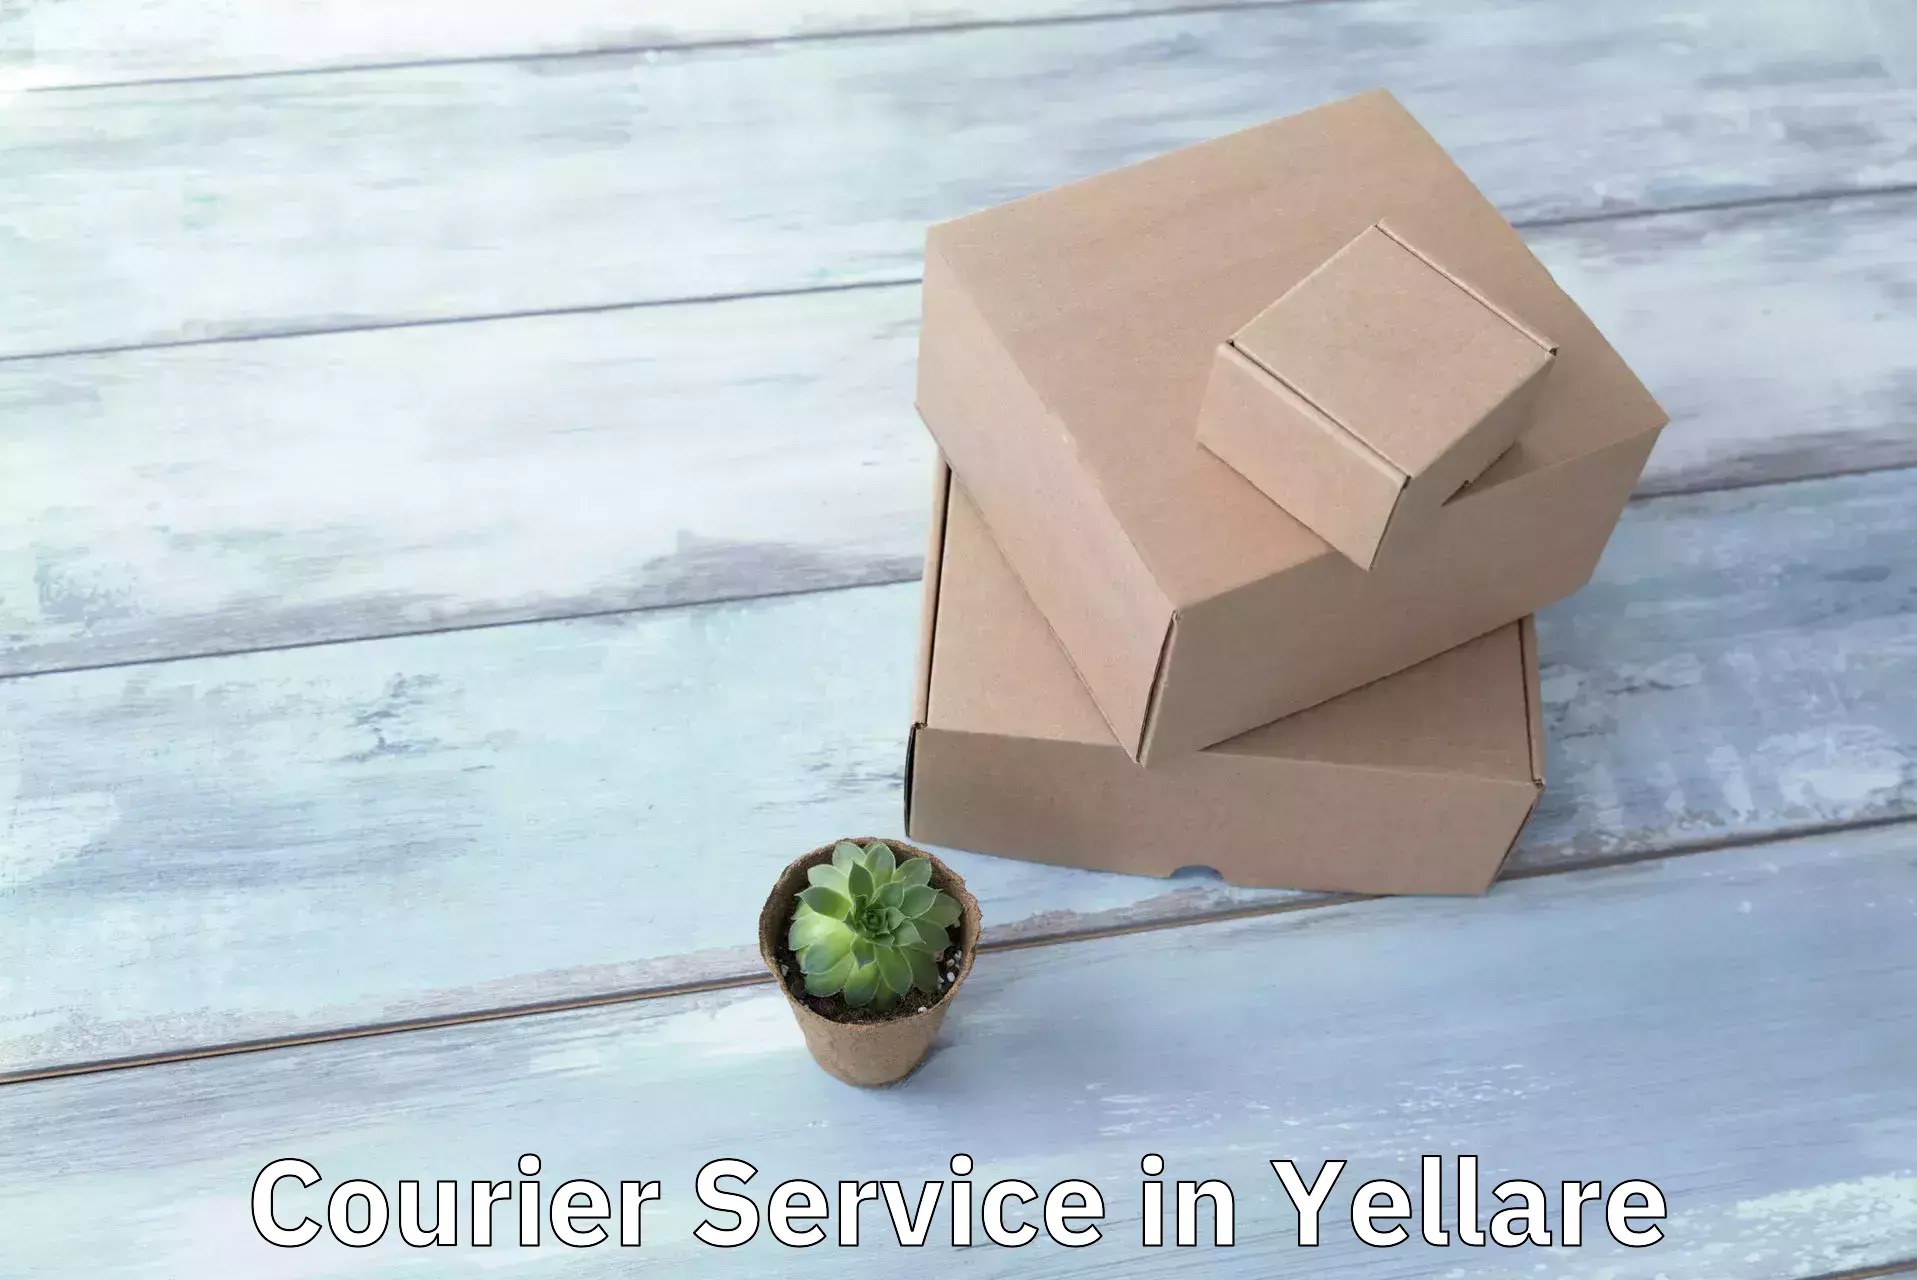 Automated shipping processes in Yellare